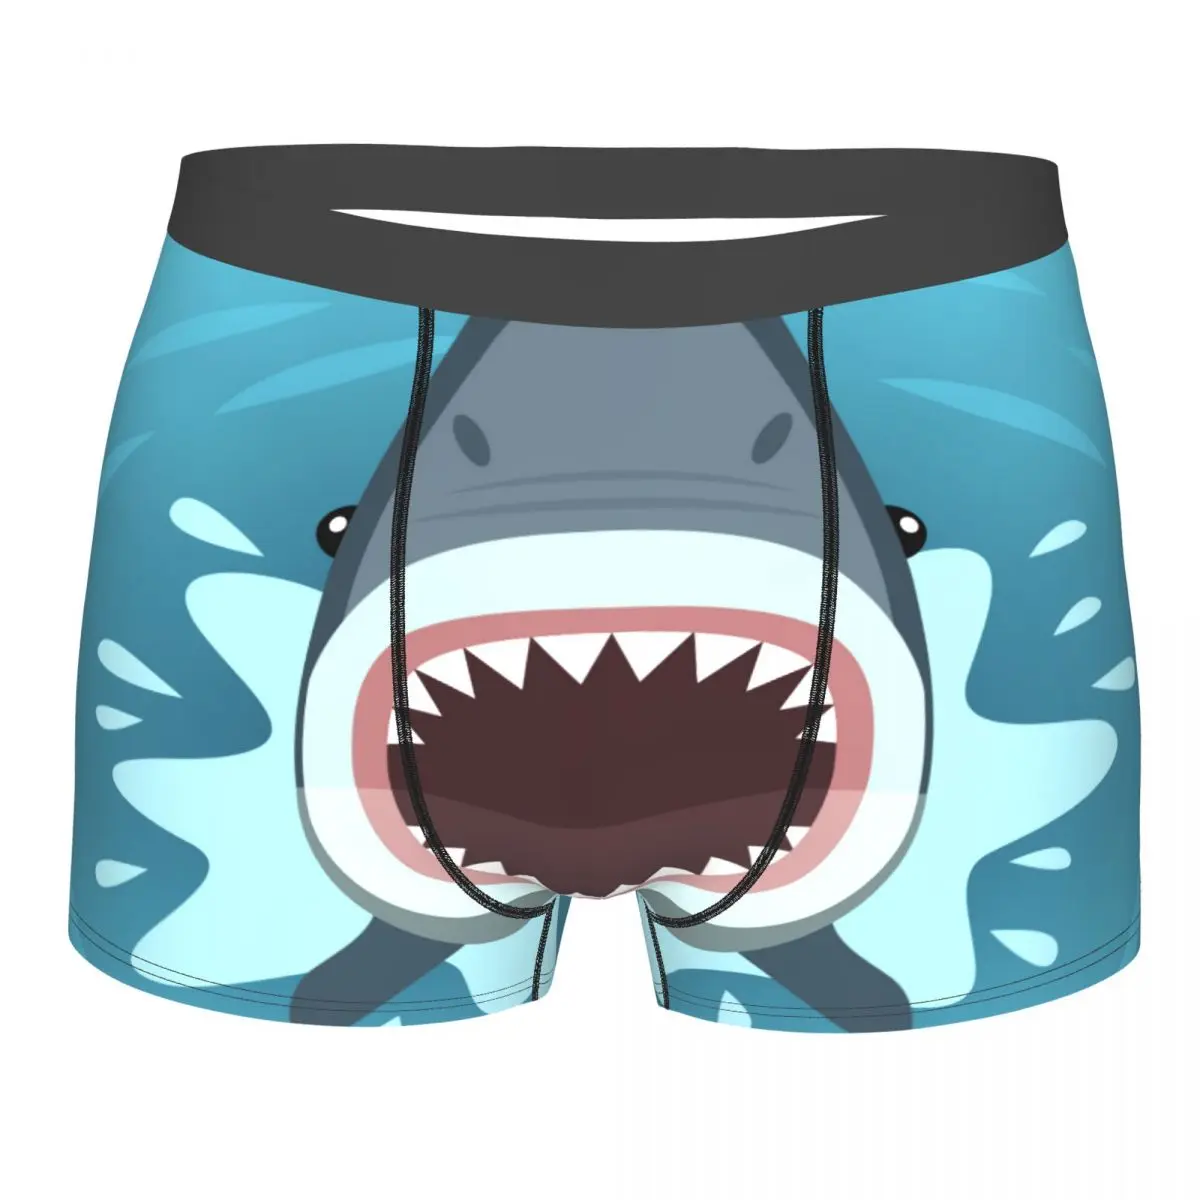 Boxer Men Shorts Underwear Male Shark With Open Mouth Full Of Sharp Teeth Boxershorts Panties Underpants Man Sexy